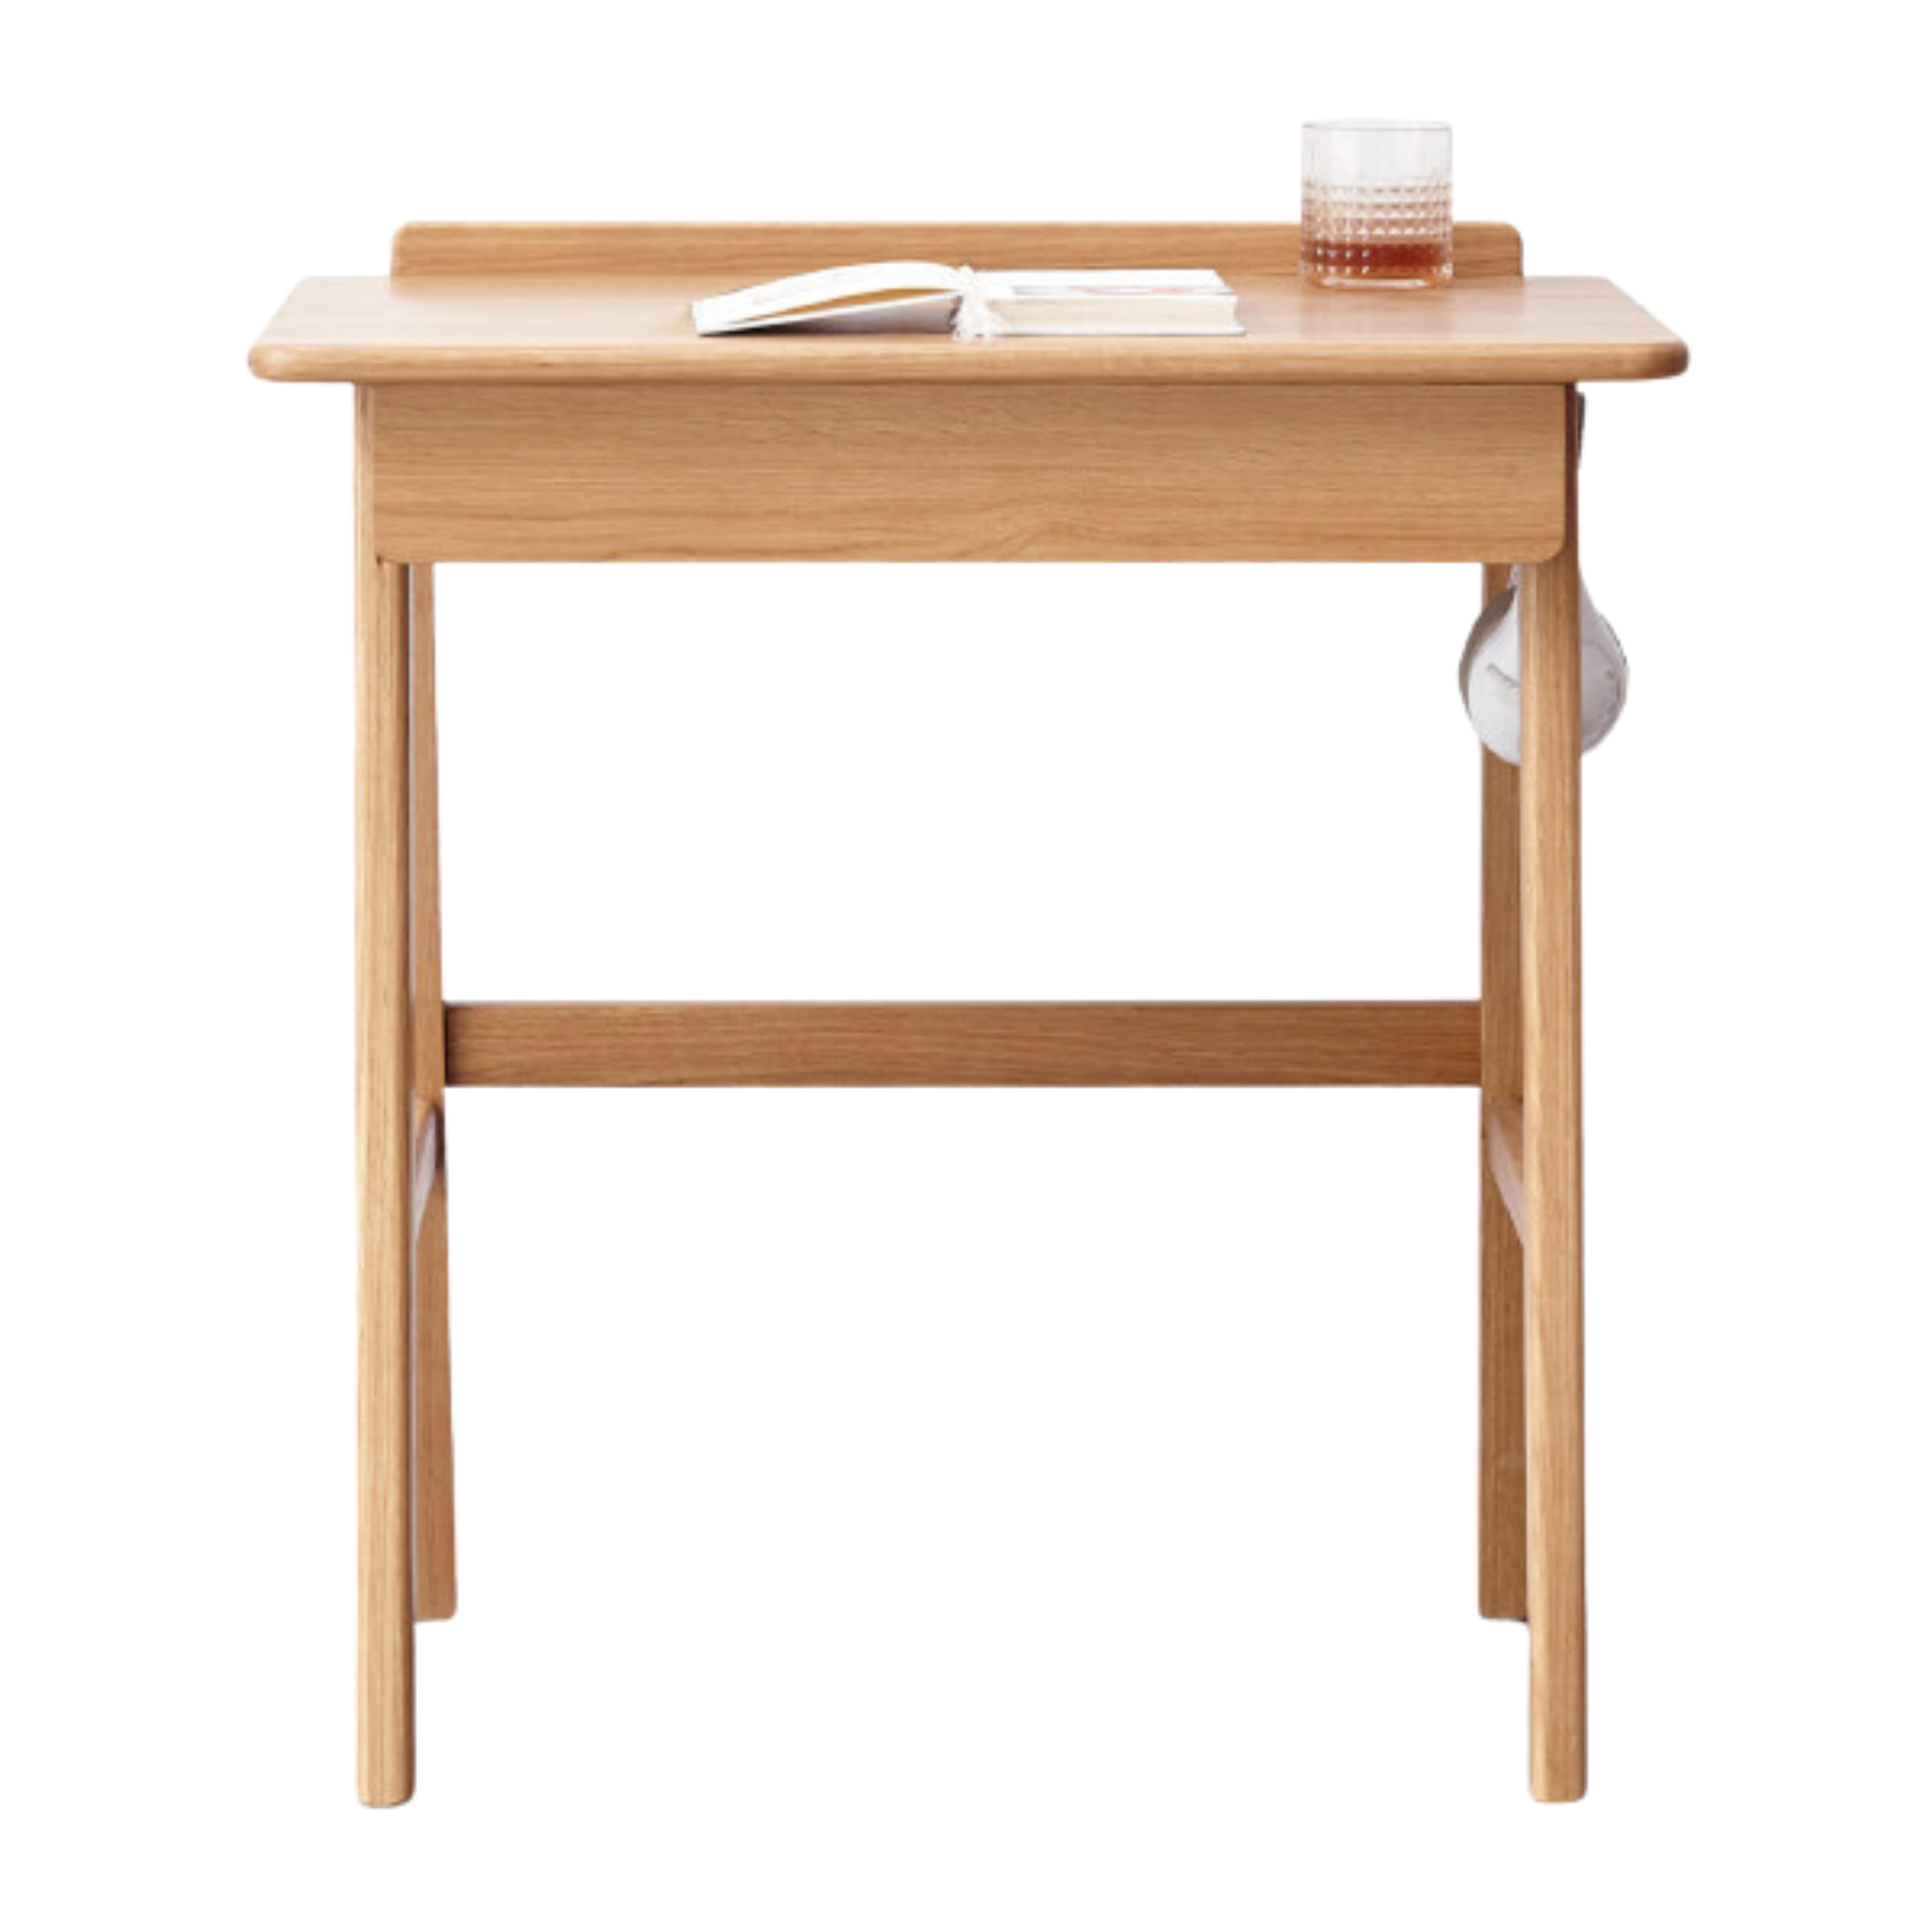 Oak solid wood Office desk, console table, dressing table